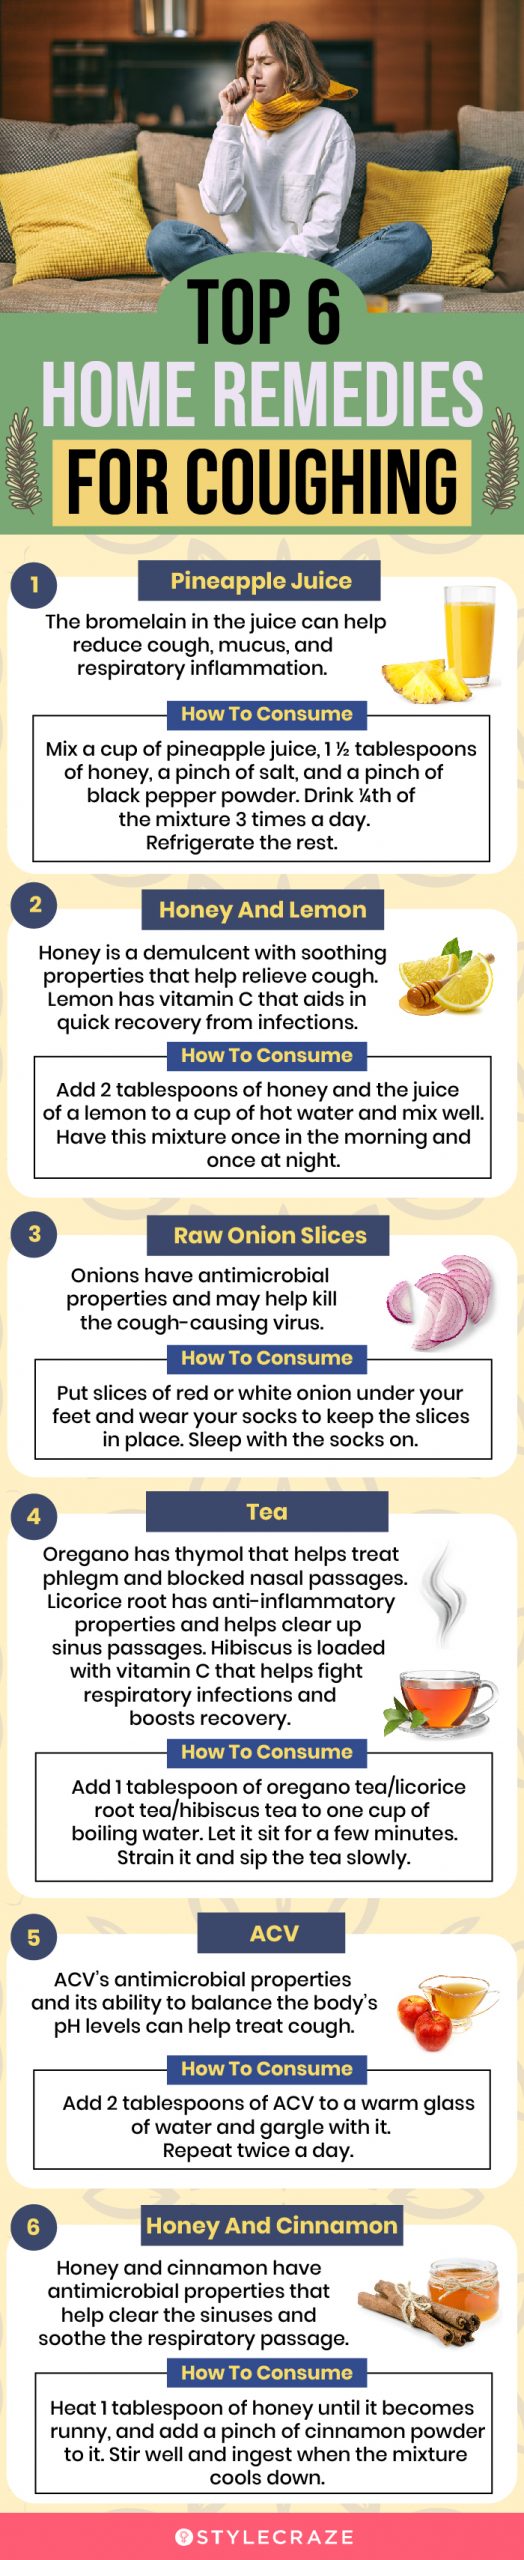 top 6 home remedies for coughing (infographic)